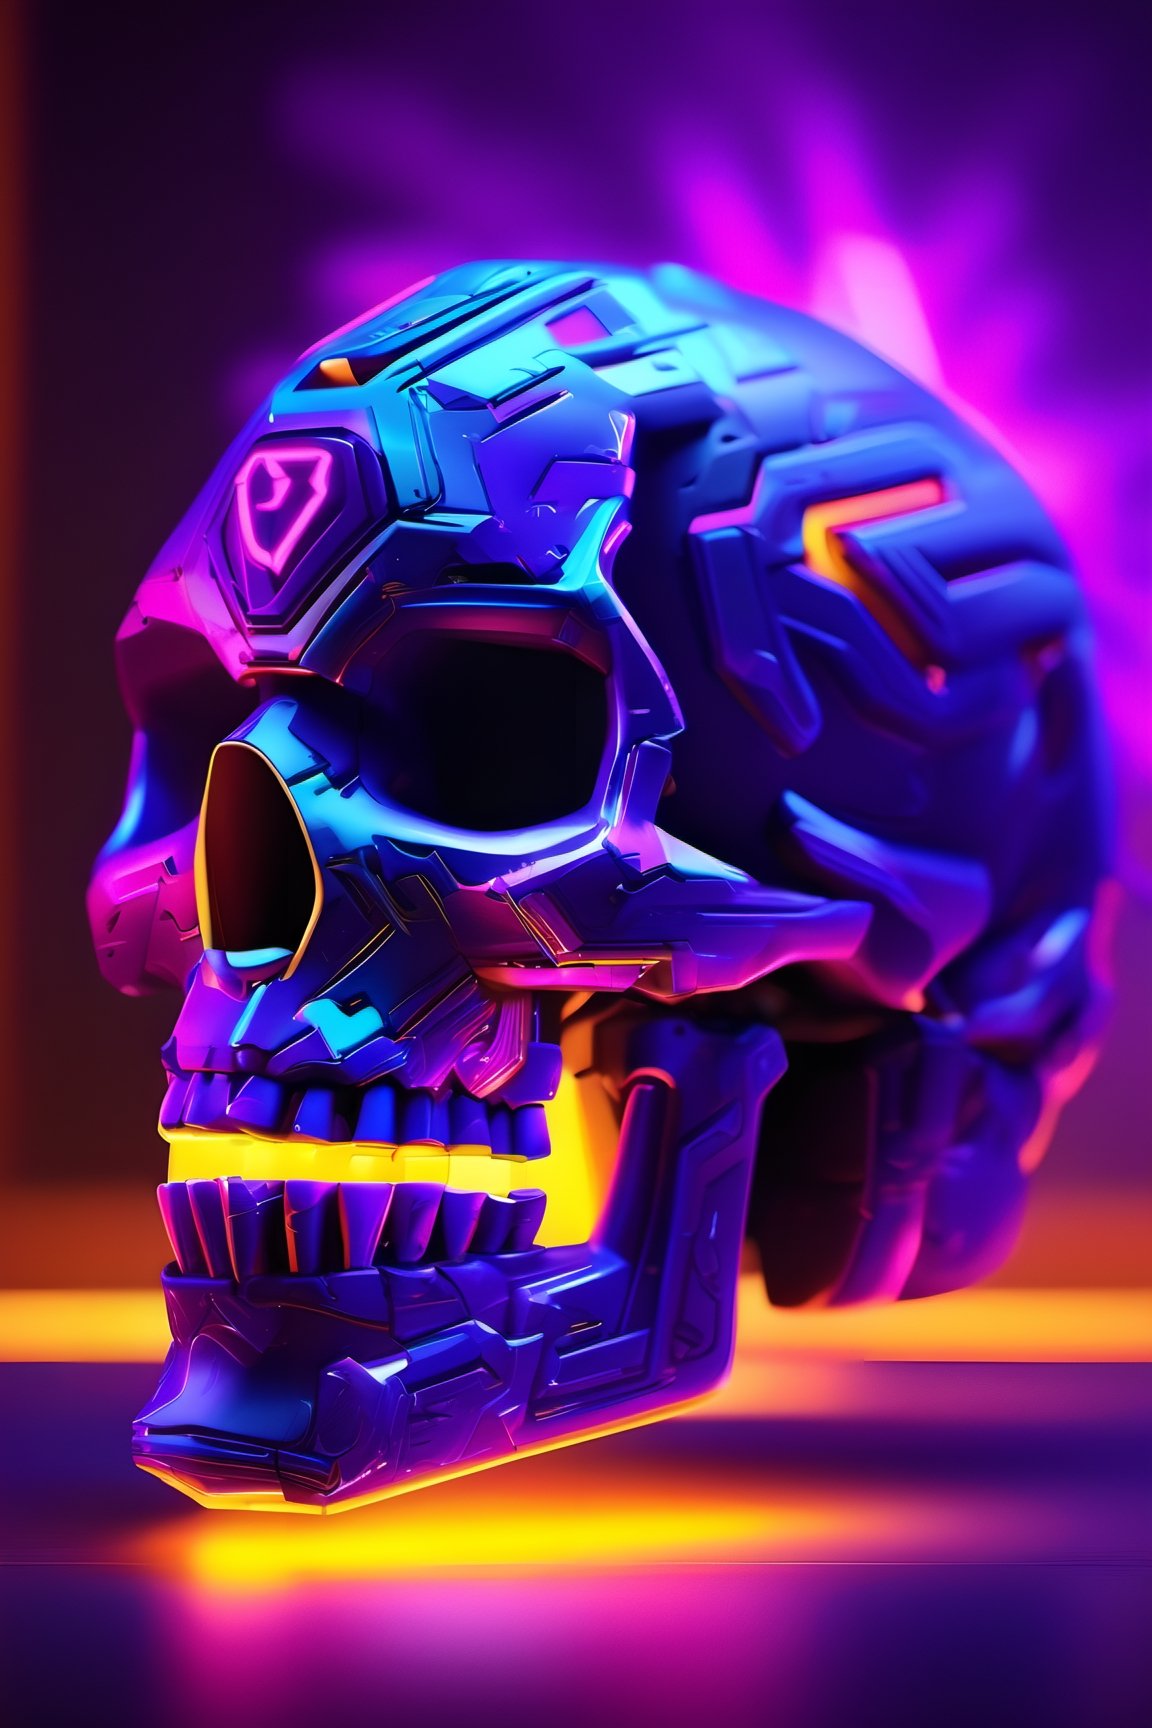 Overwatch style, video_game style, A skull is made up of code characters in Overwatch game style. The letters glow with a range of purple and neon colors, as if they have been taken from a digital world. The light and color shines and moves across the surface of the skull, giving the figure an almost hypnotic appearance.